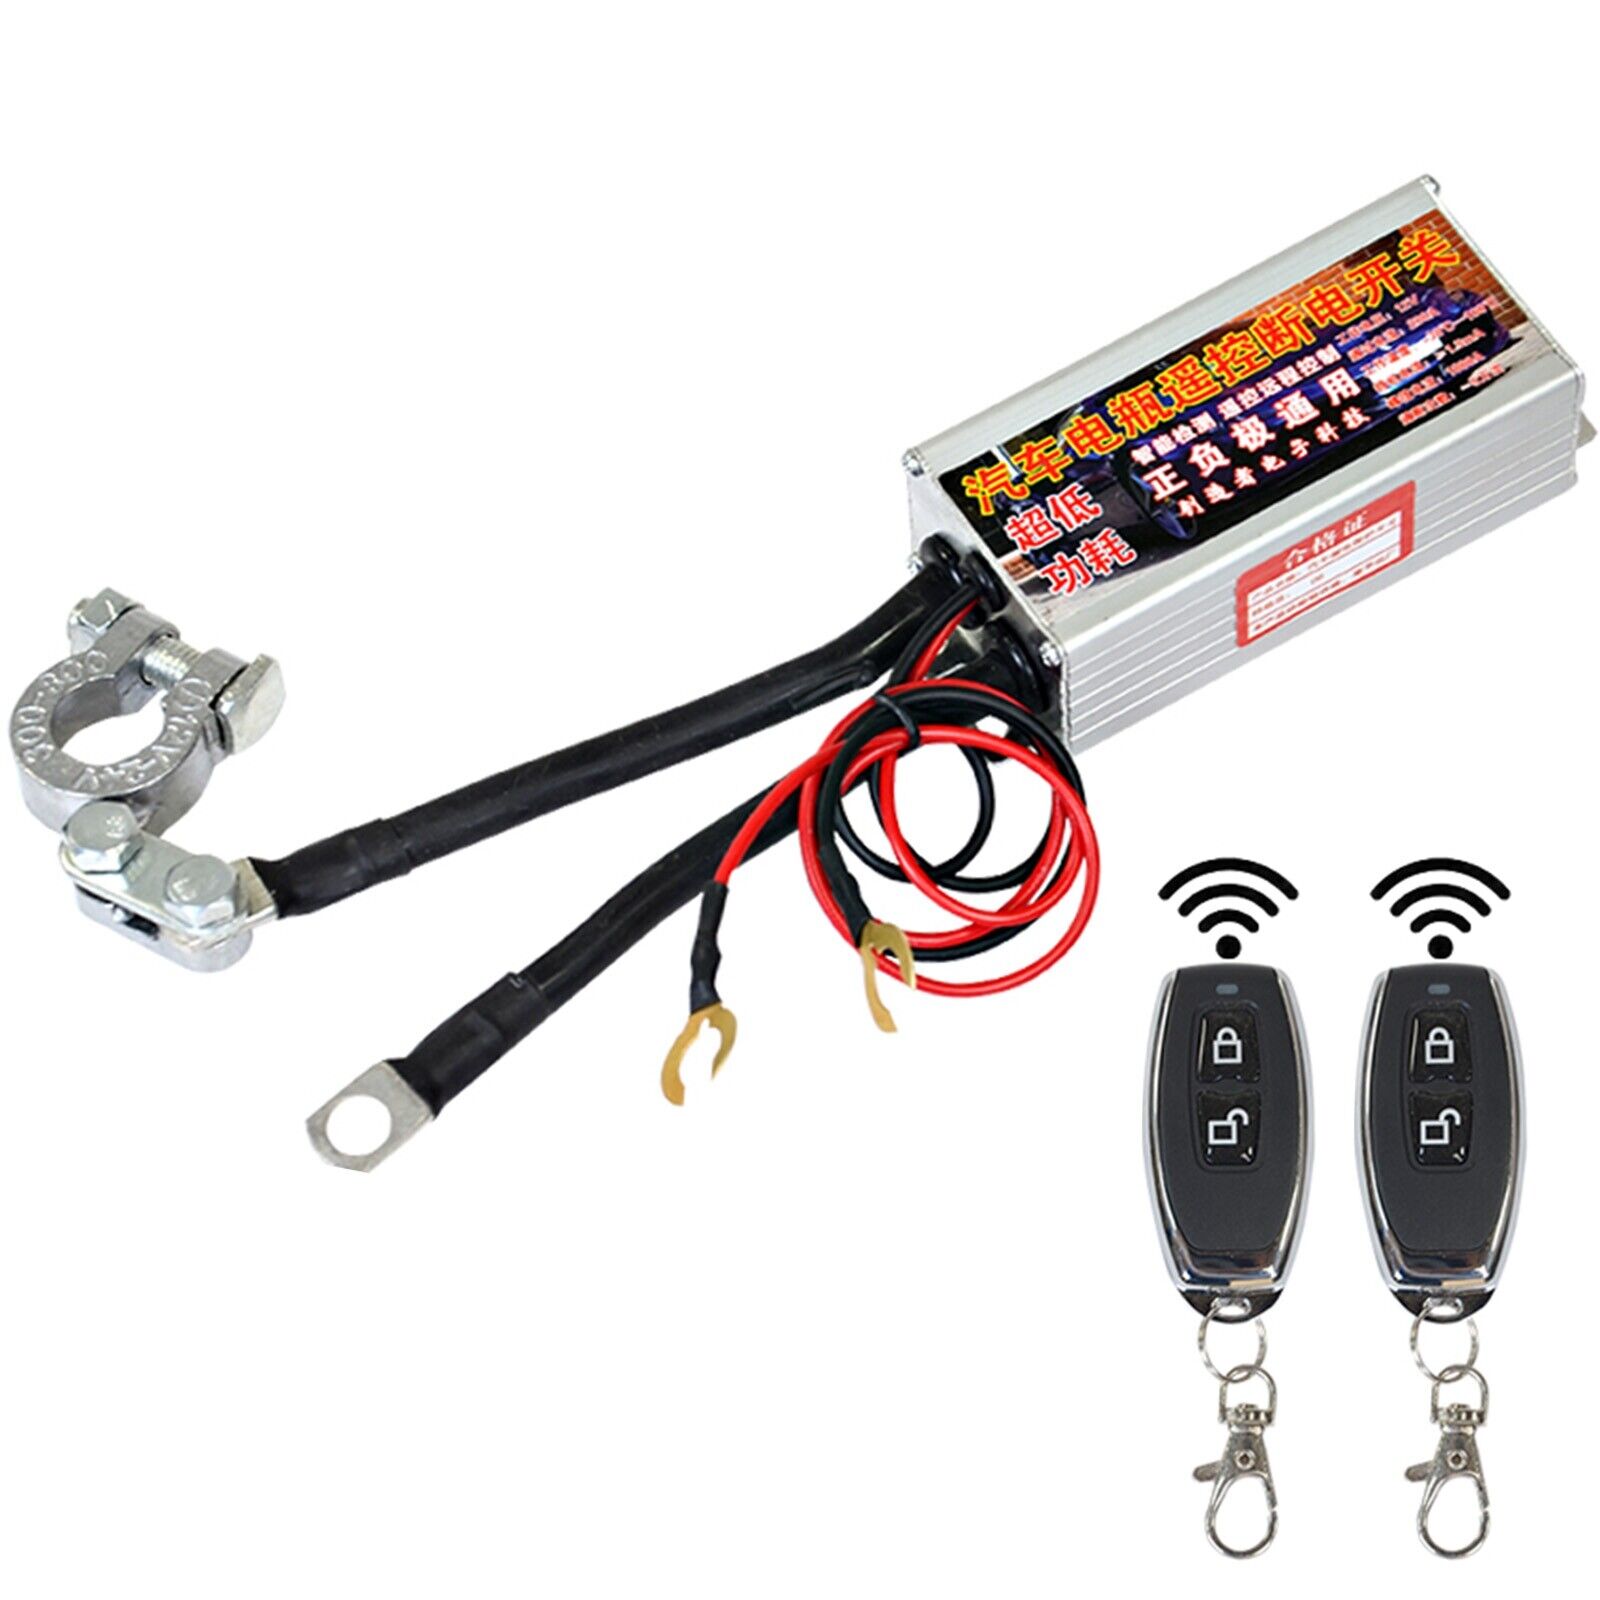 200A 12V Car Battery Switch Disconnect Cut Off Master Kill w/2 Remote Control